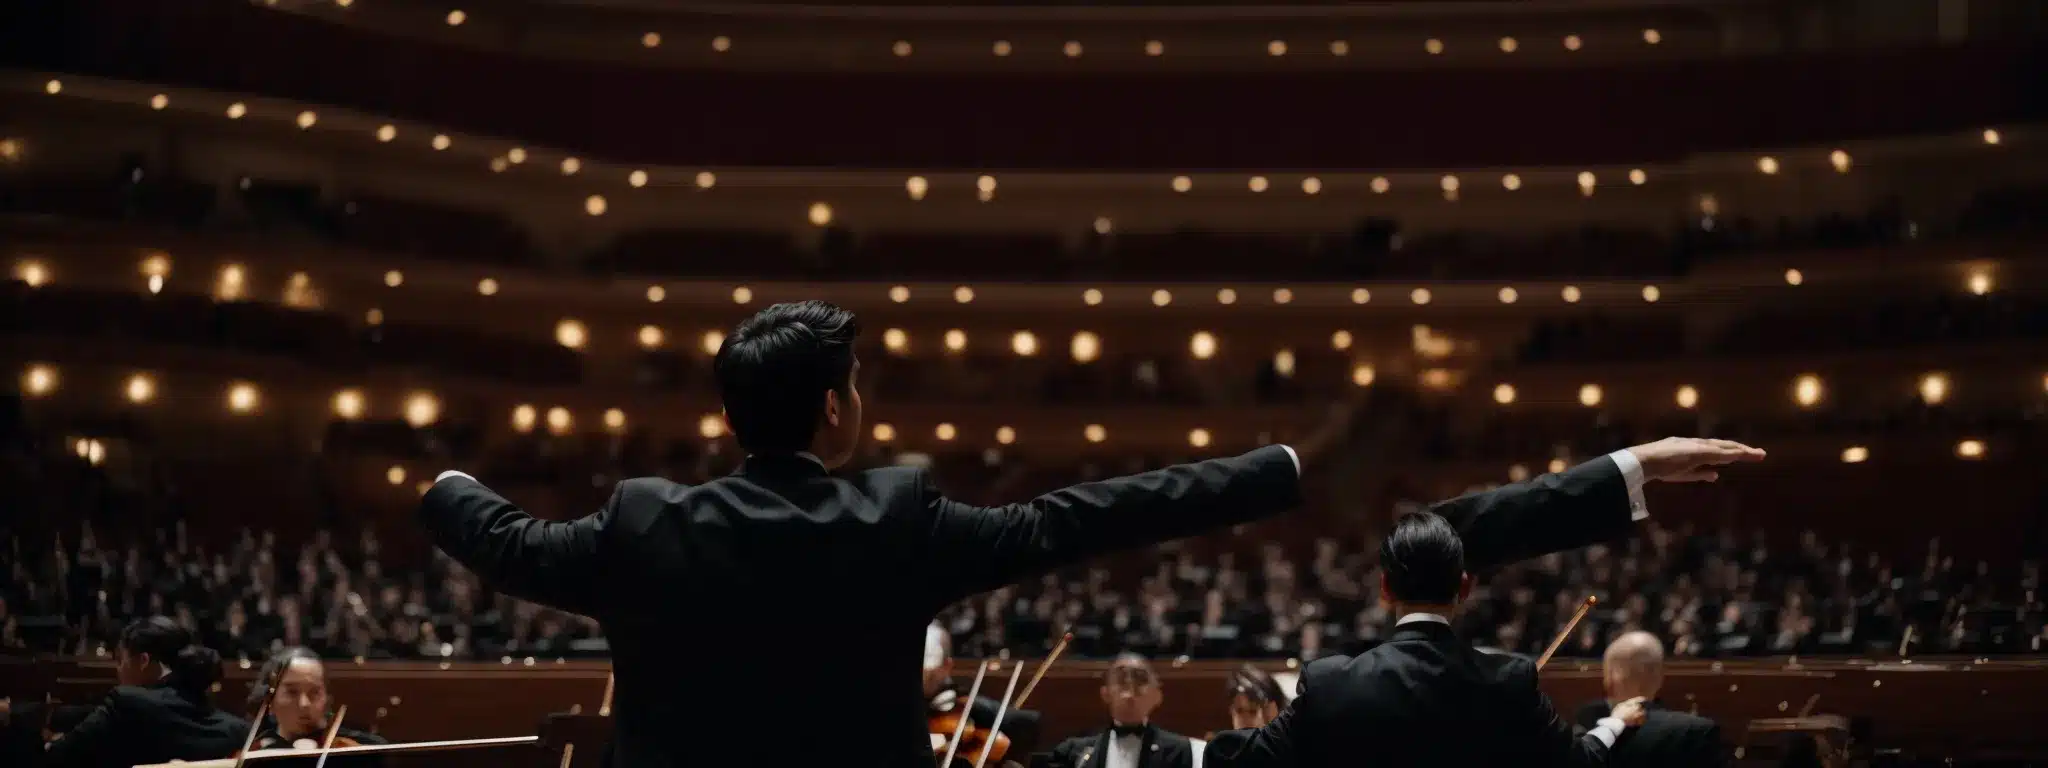 A Conductor With Arms Wide Open, Ready To Lead An Expectant Orchestra In A Grand Concert Hall.